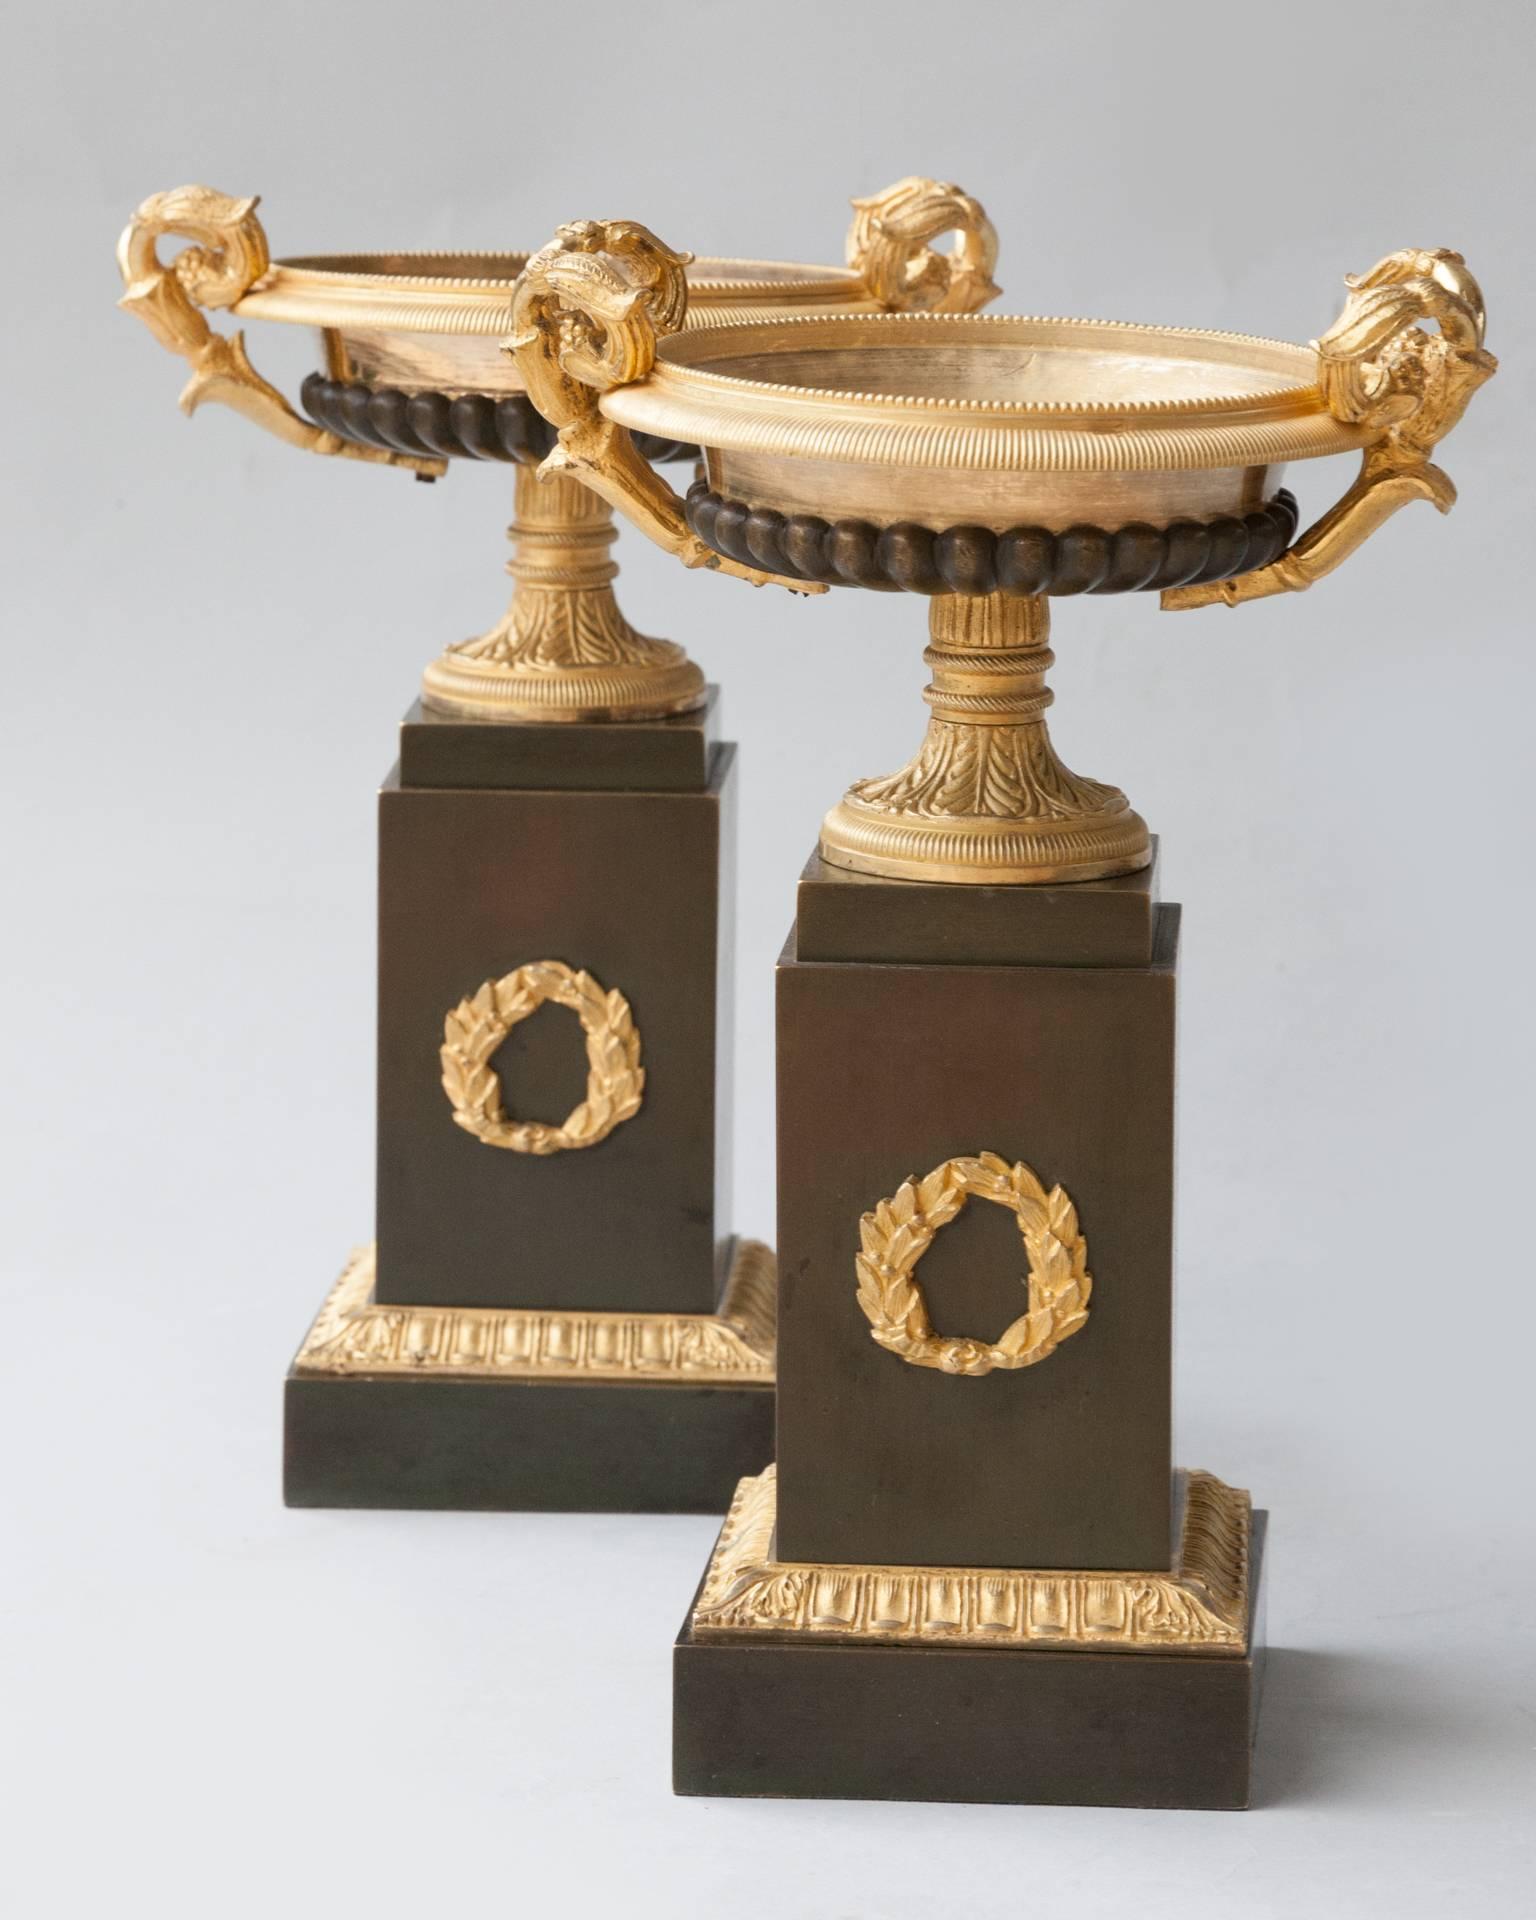 A pair of shallow gilt urns with a moulded and finely incised reeded edge over a patinated gadrooned body. The socle decorated with leaves and resting on a patinated bronze plinth with one gilt laurel wreath in relief. Retaining its original mercury